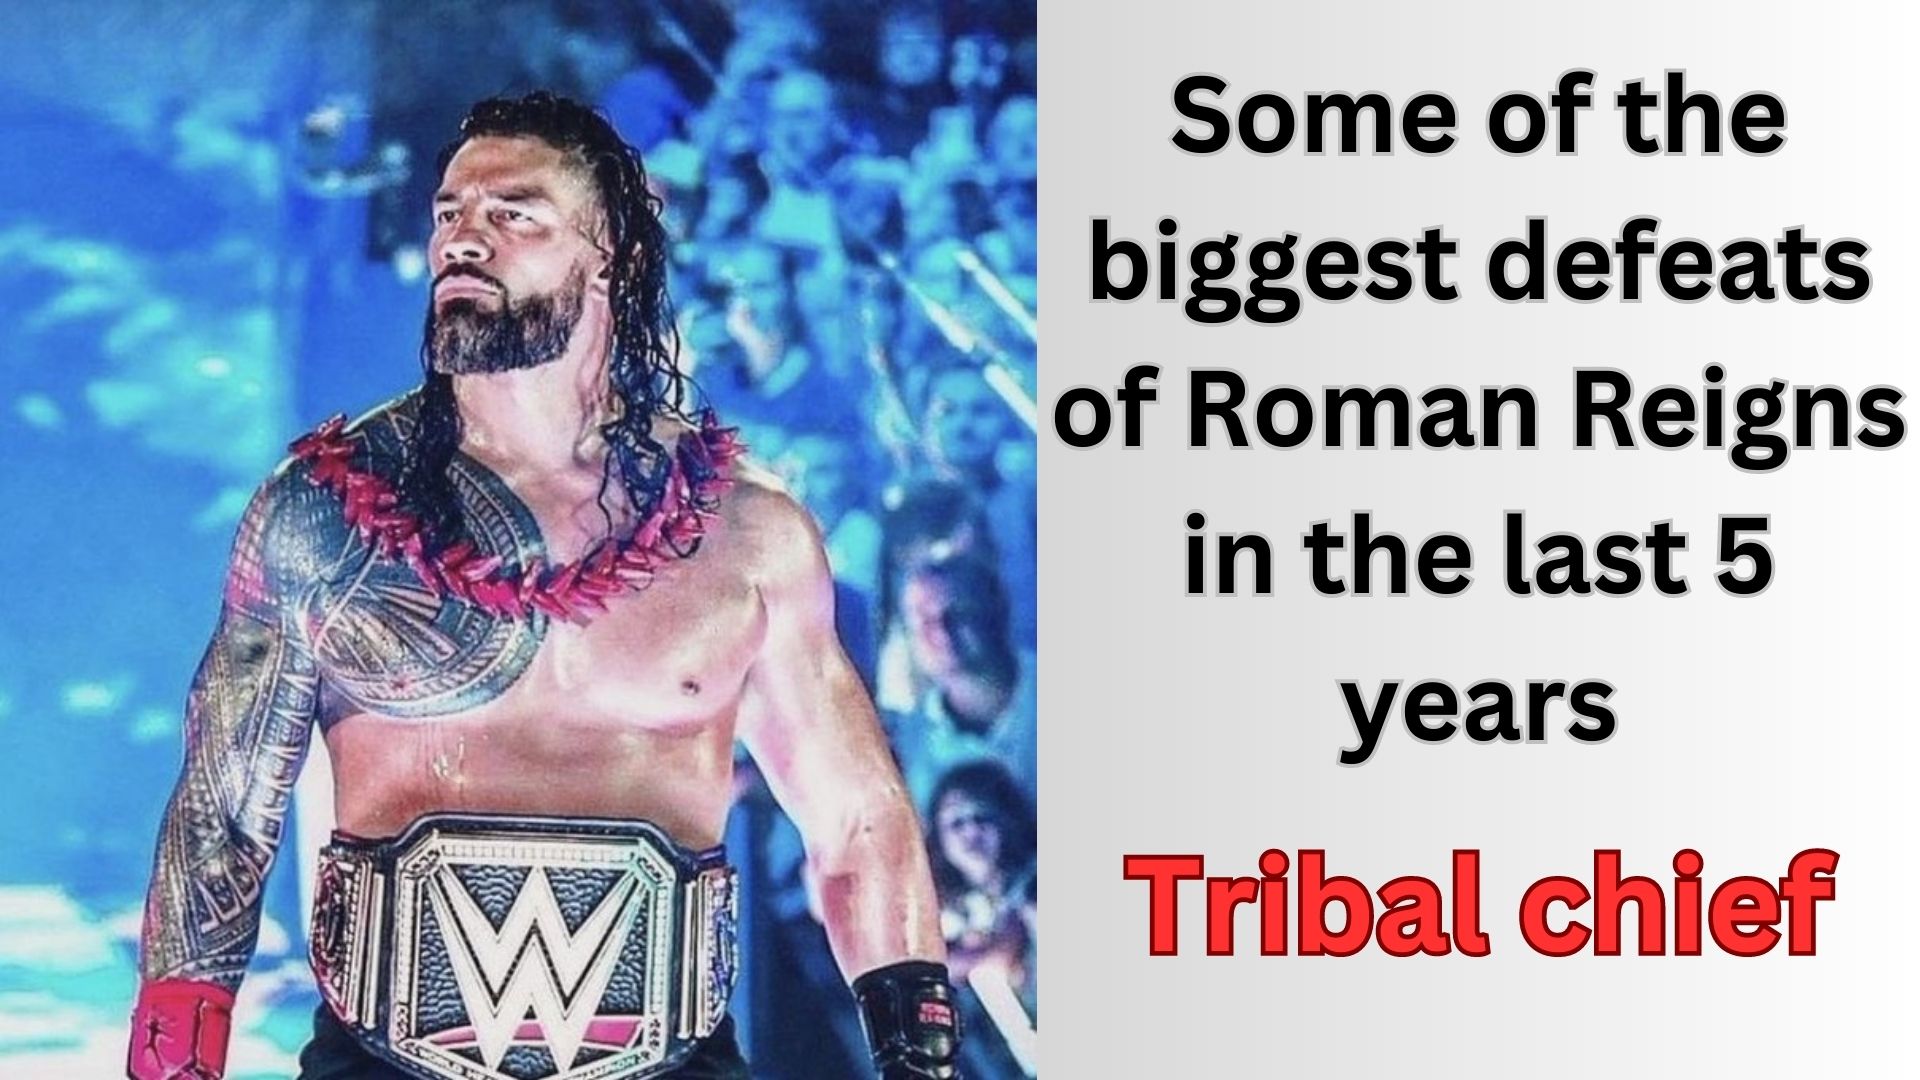 Roman Reign got 12 defeats in last 5 years, 4 wrestlers defeated him 2 times | The Miz also defeated